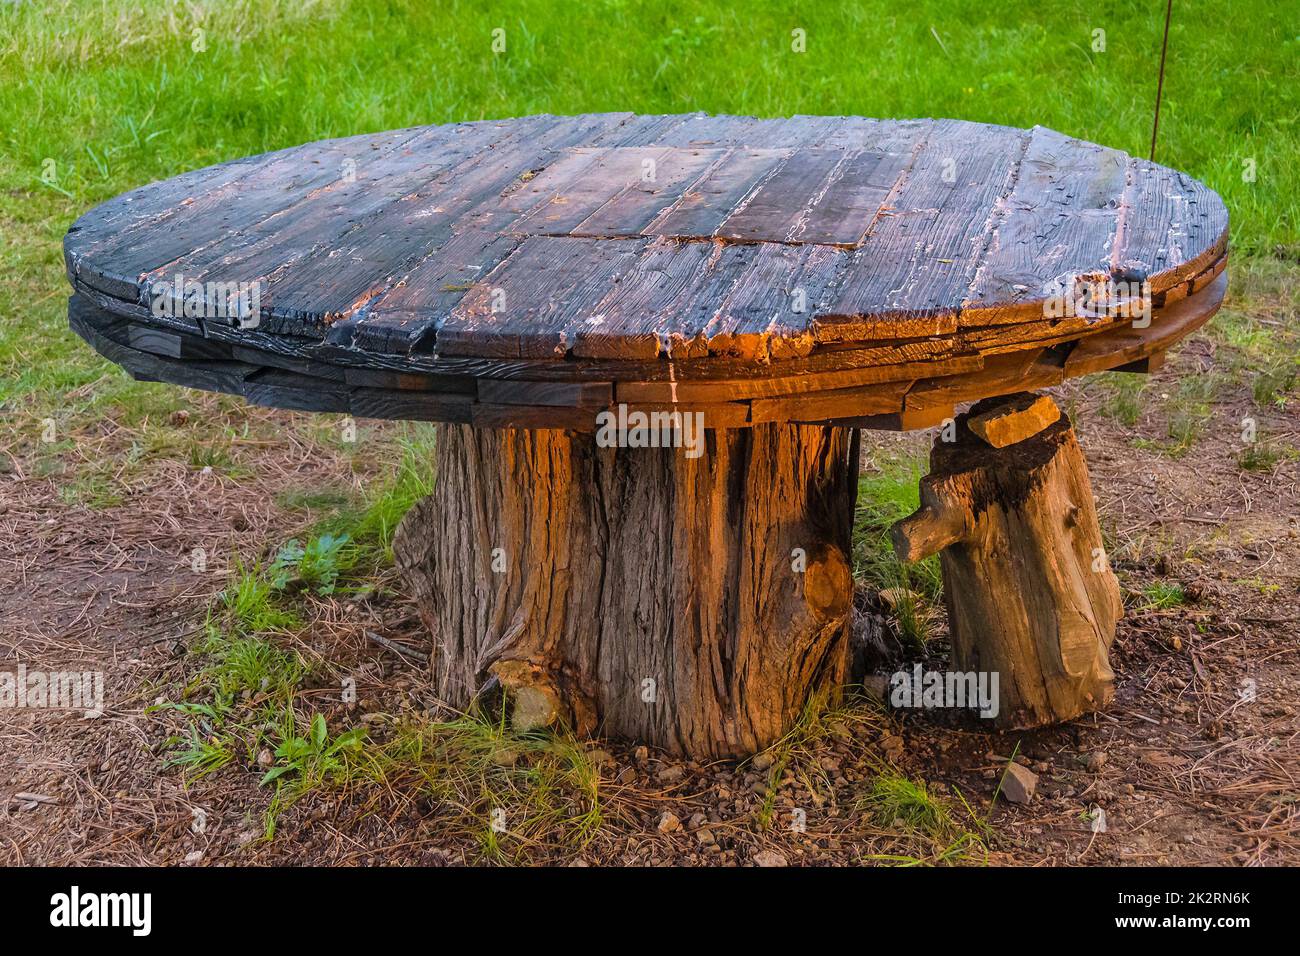 Outdoor Rustic Wooden Table Stock Photo